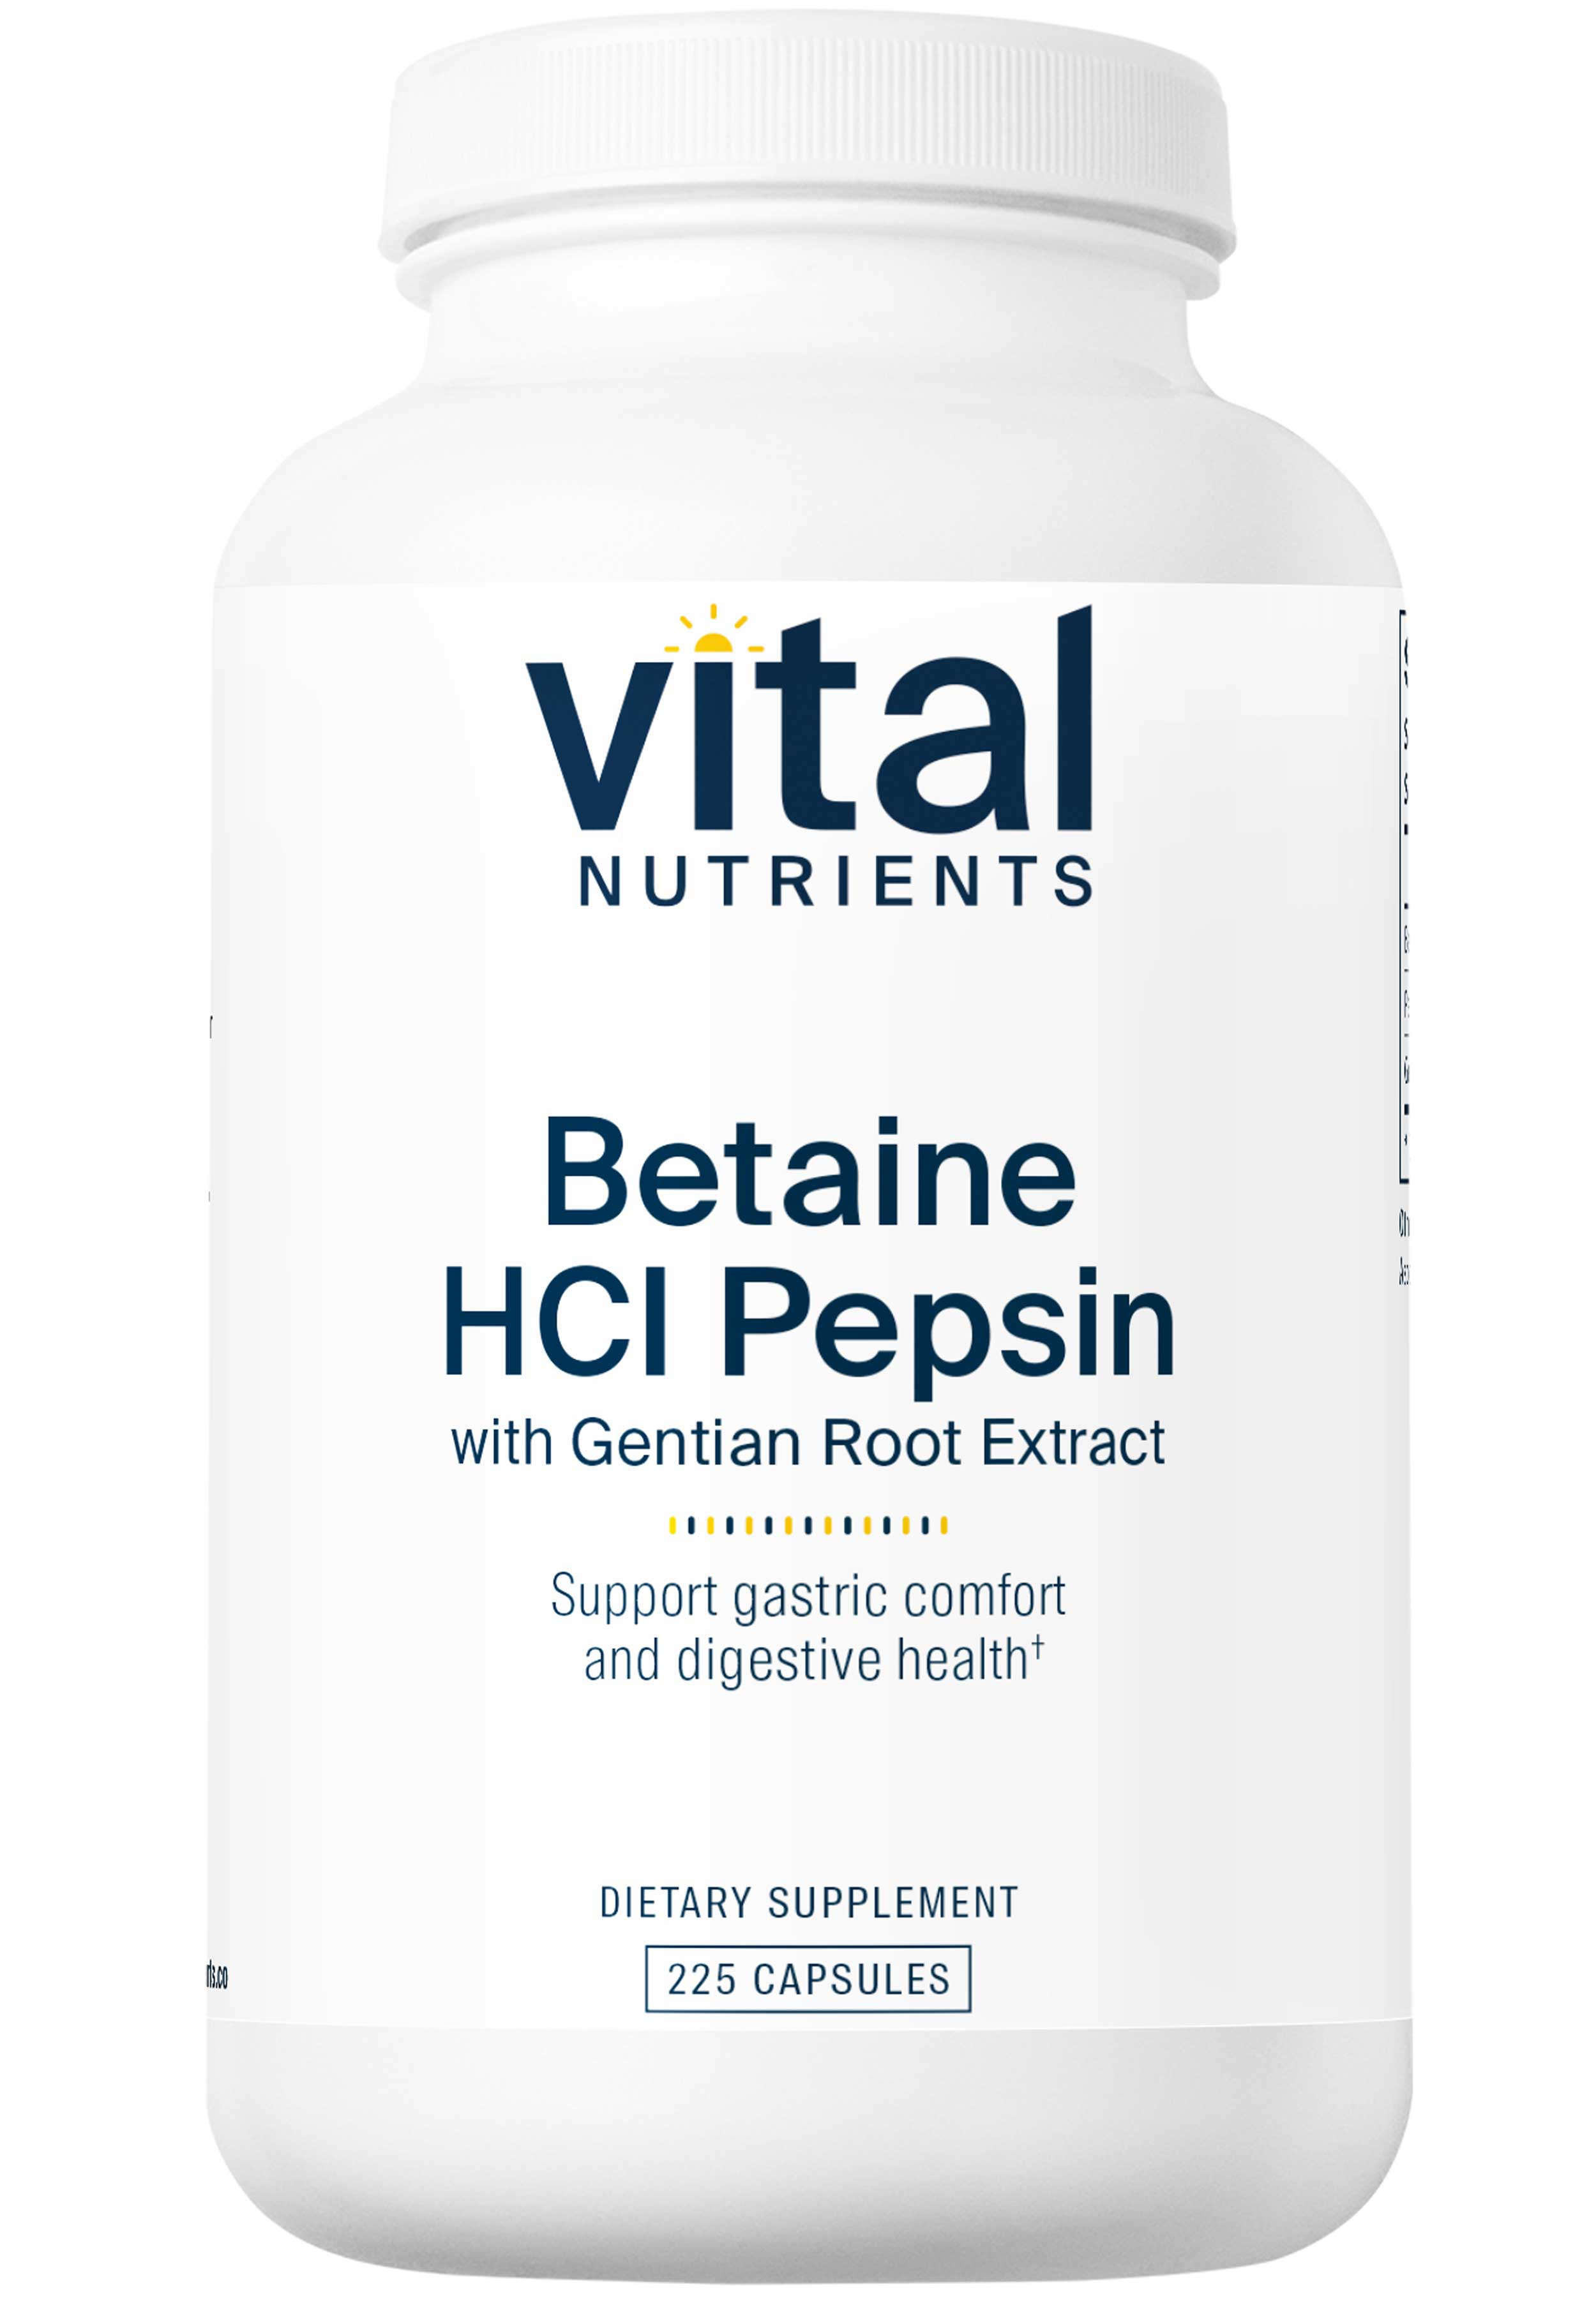 Vital Nutrients Betaine HCL Pepsin Gentian Root Extract